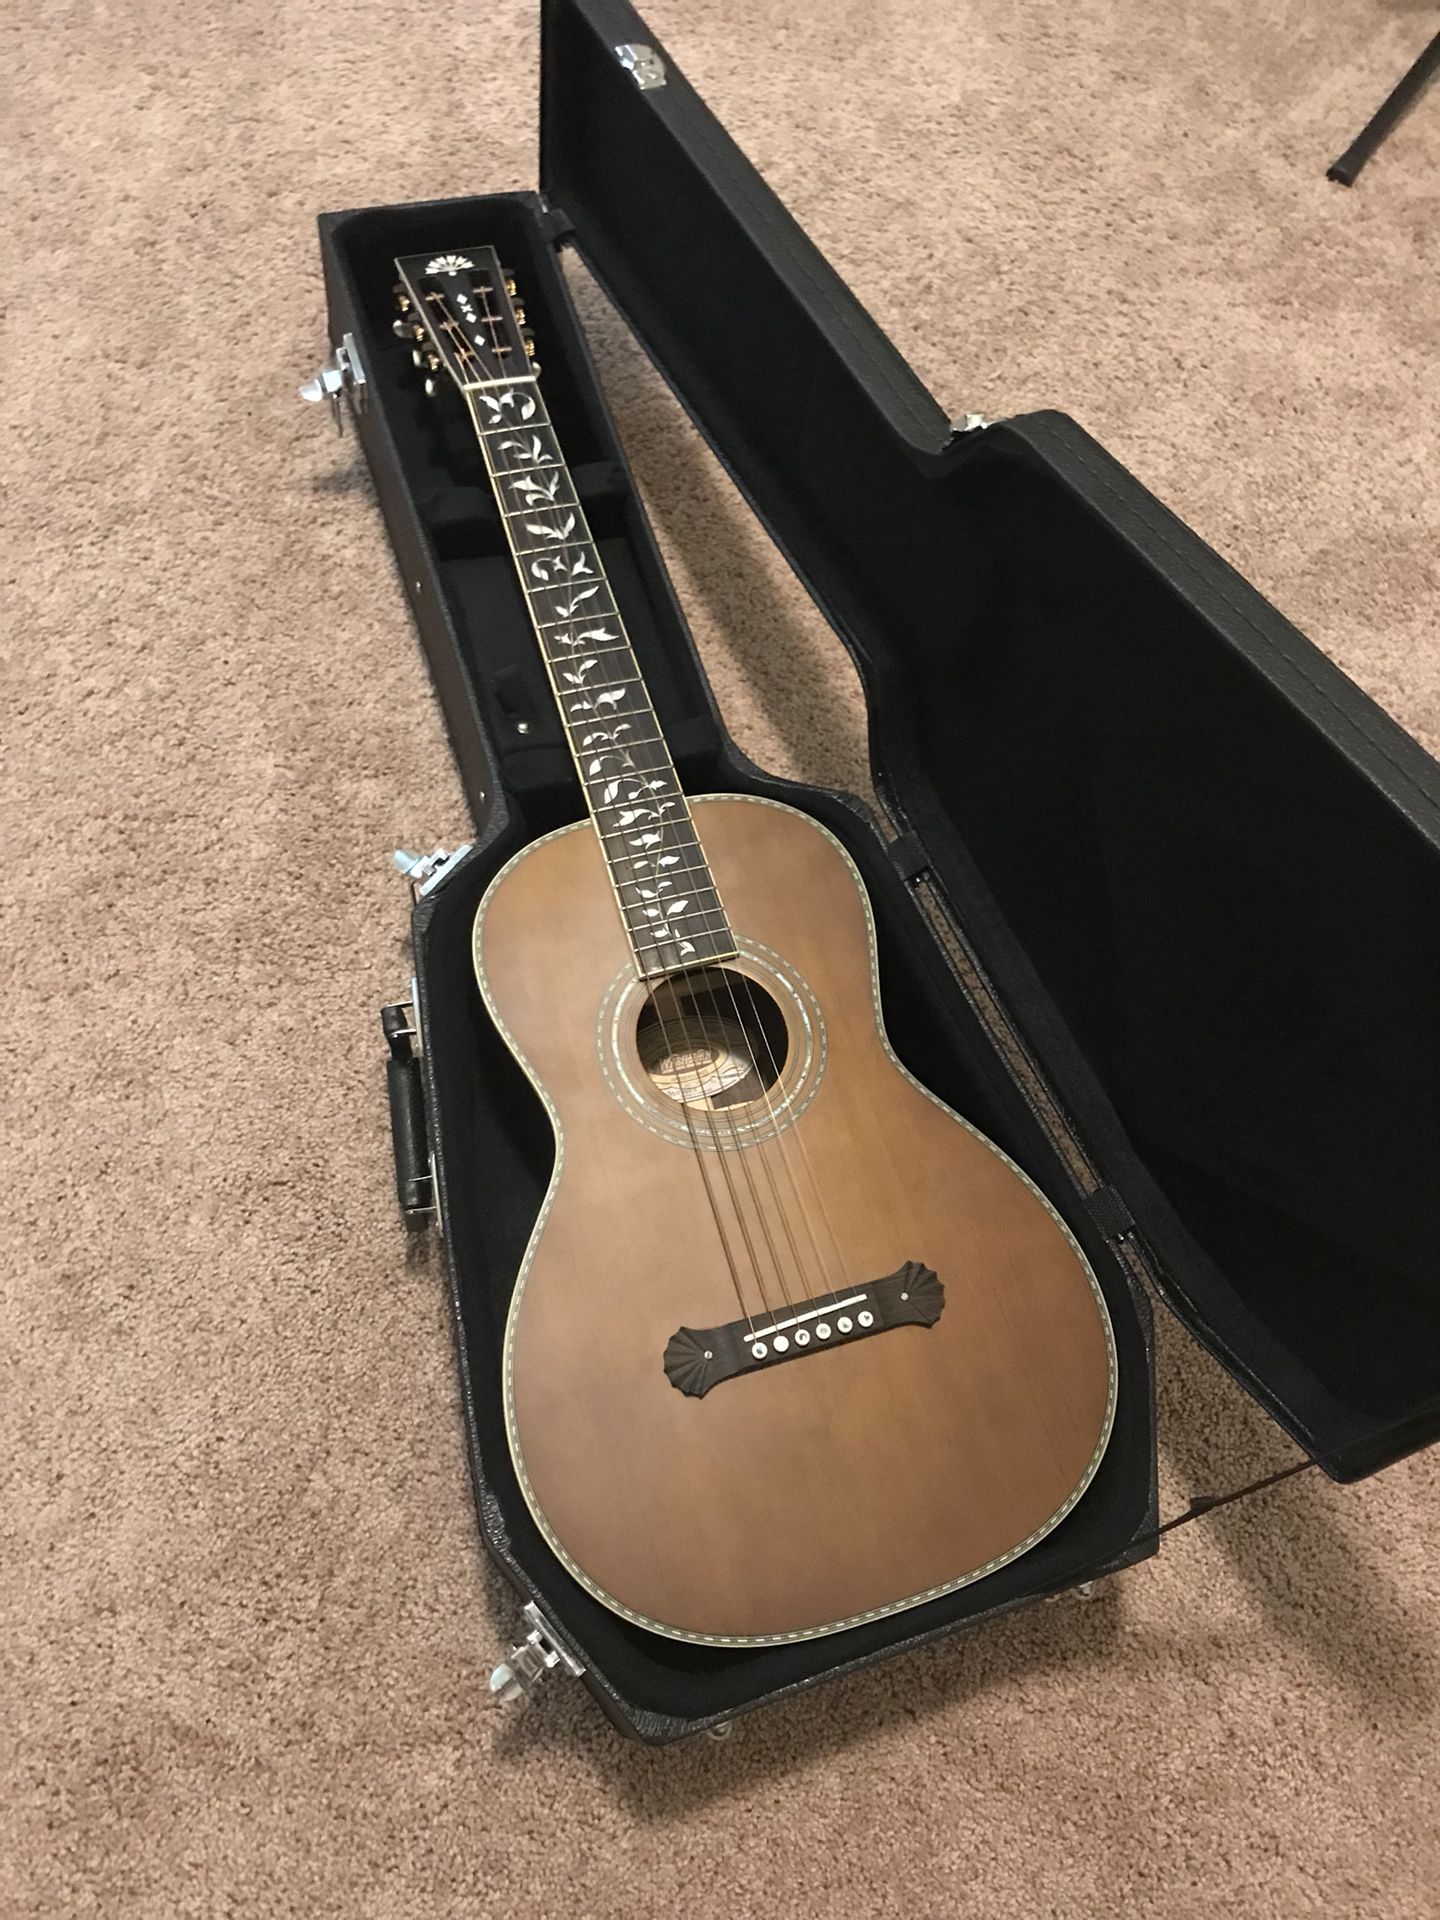 Washburn parlor guitar for Sale in GA - OfferUp